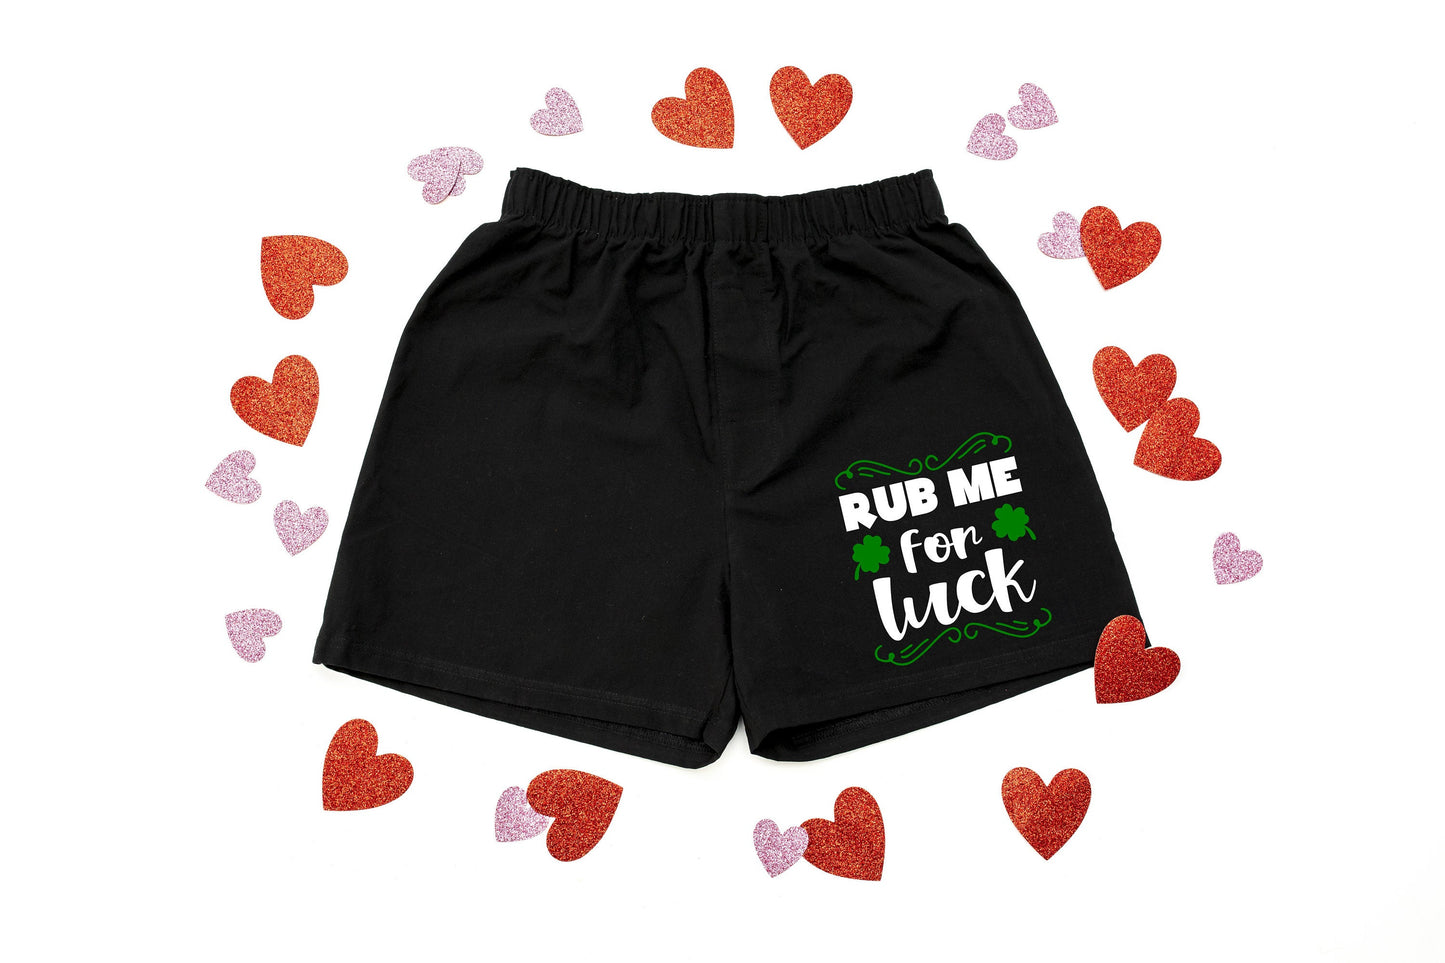 Rub Me For Luck Men&#39;s St Patrick&#39;s Day Cotton Boxer Shorts - False Fly - Gift for Him - Mens Boxers - Funny Boxers - Naughty Boxers